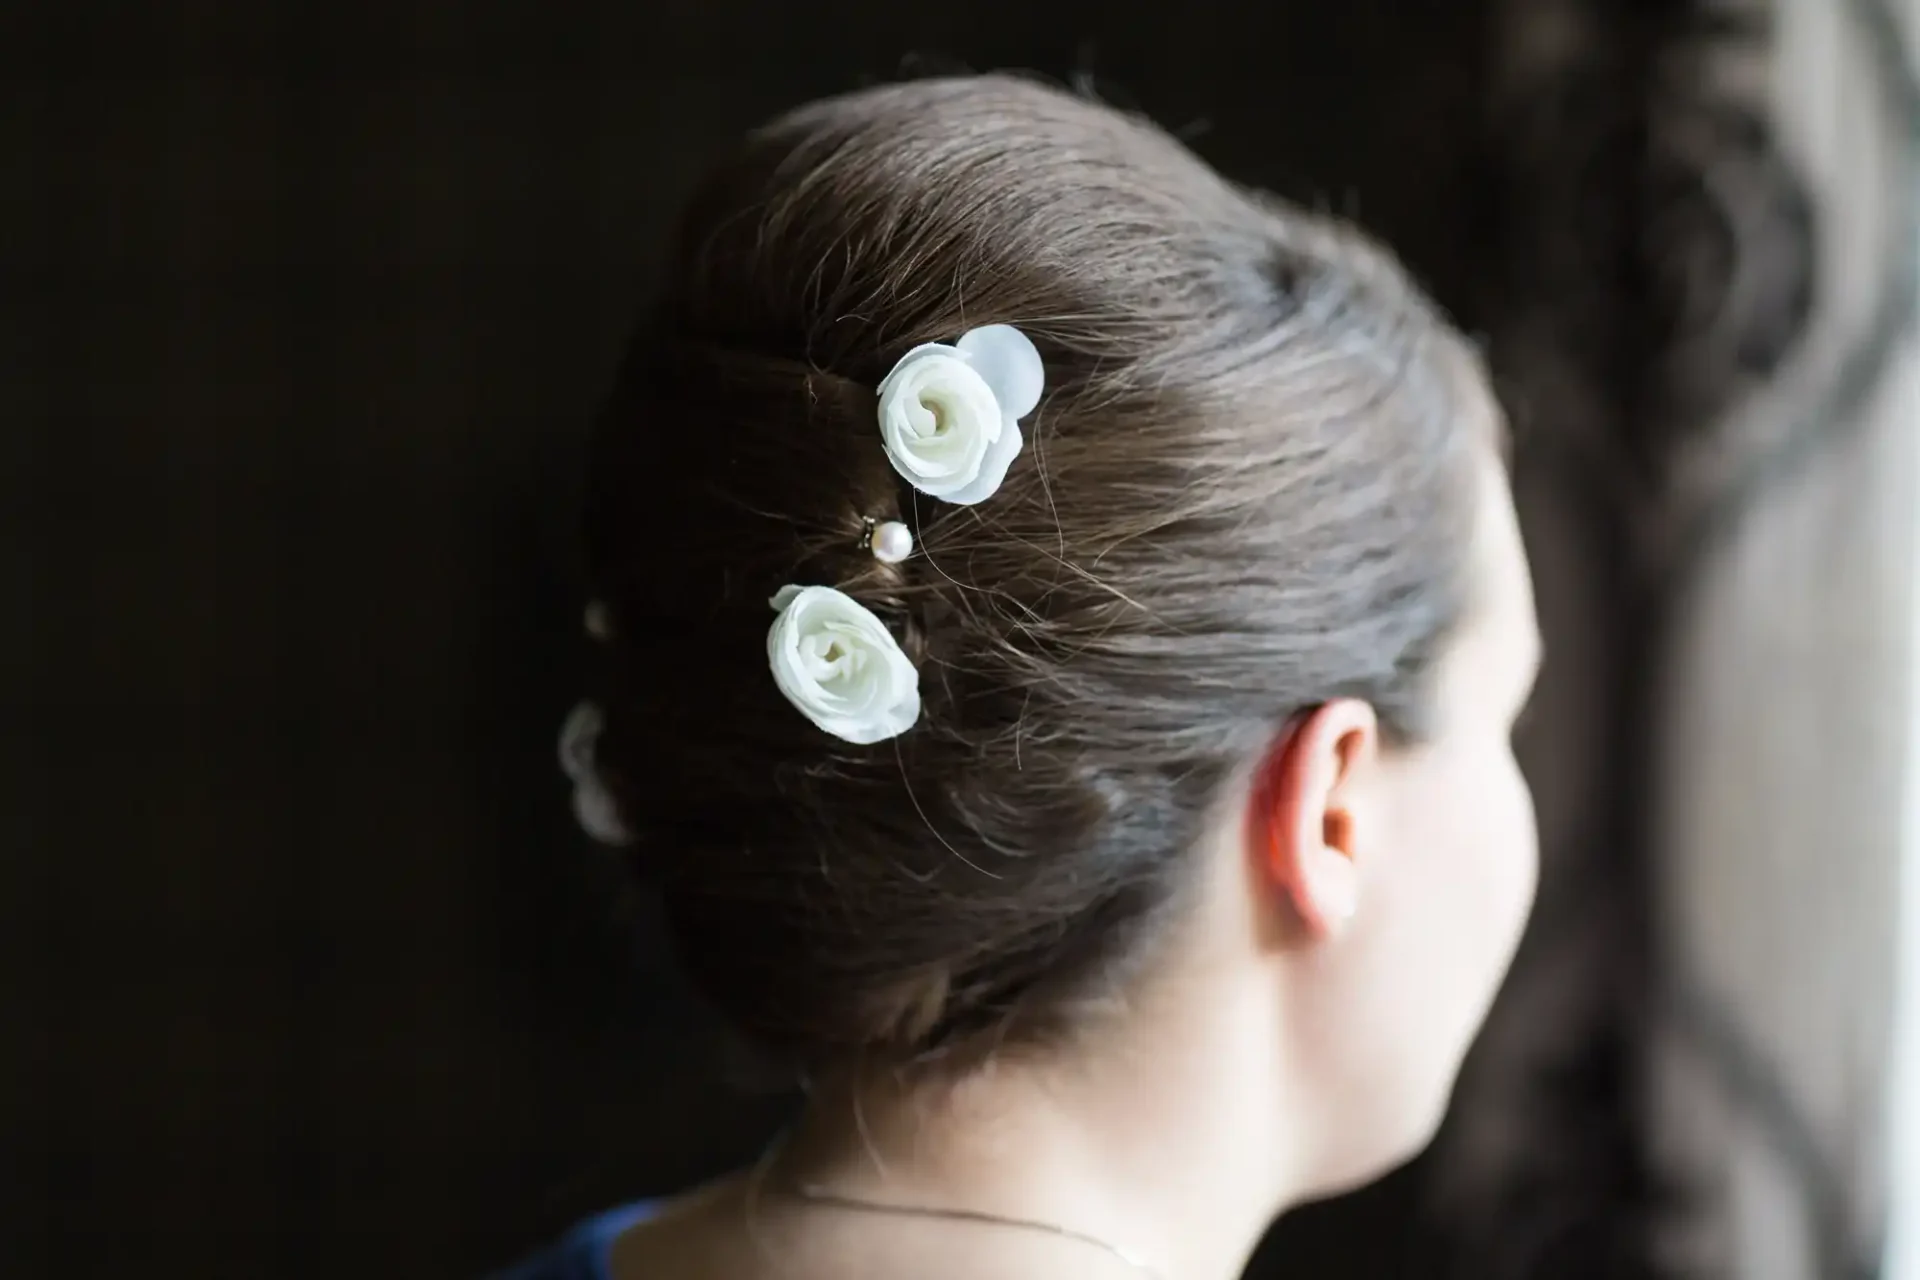 Rear view of a woman's hairstyle with three white rose accessories and tiny pearls, elegantly styled in a bun.